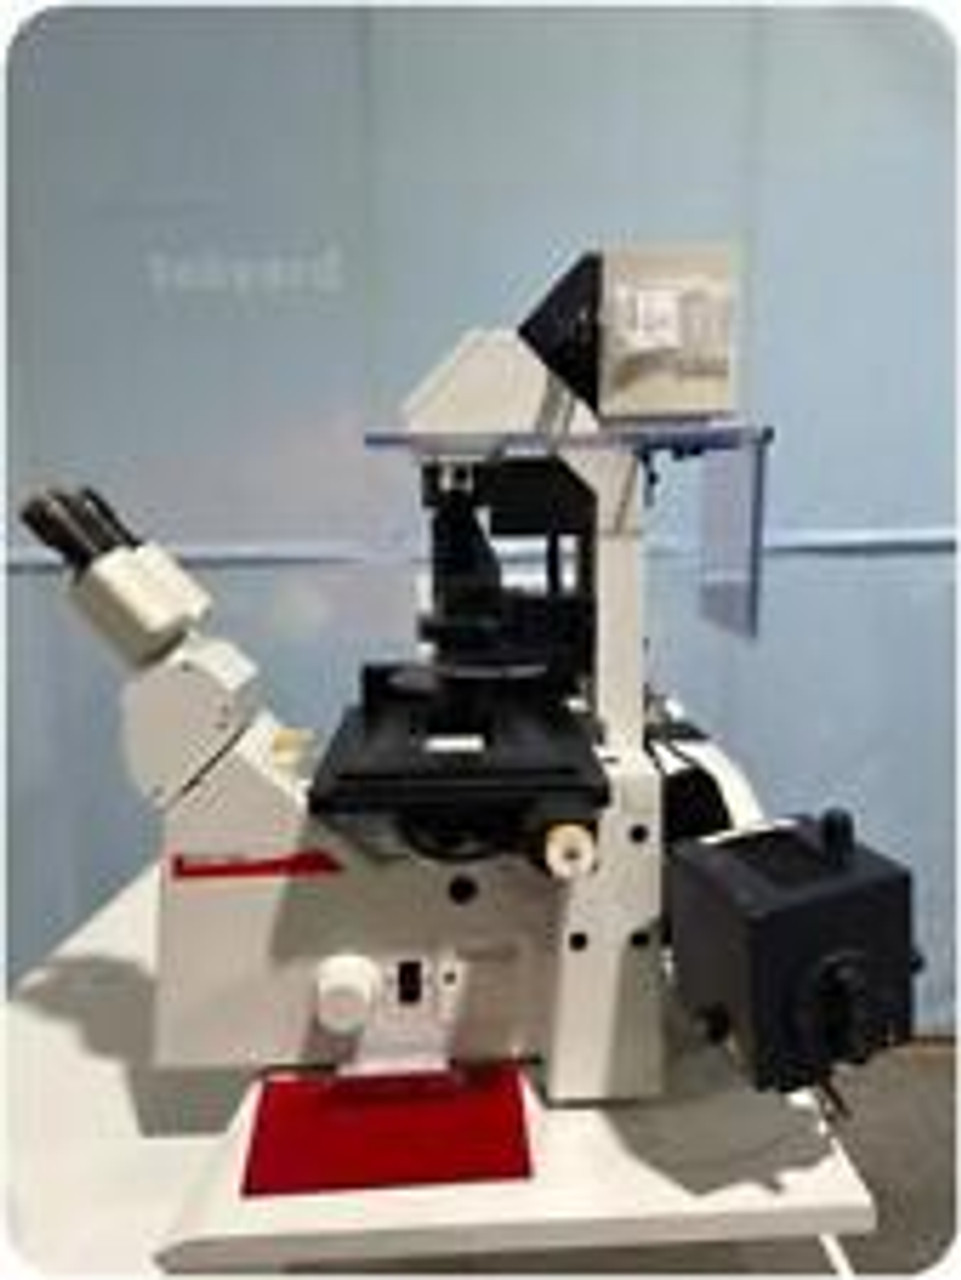 Leica Tcs SP2 Confocal Laser Scanning Microscope System 343984